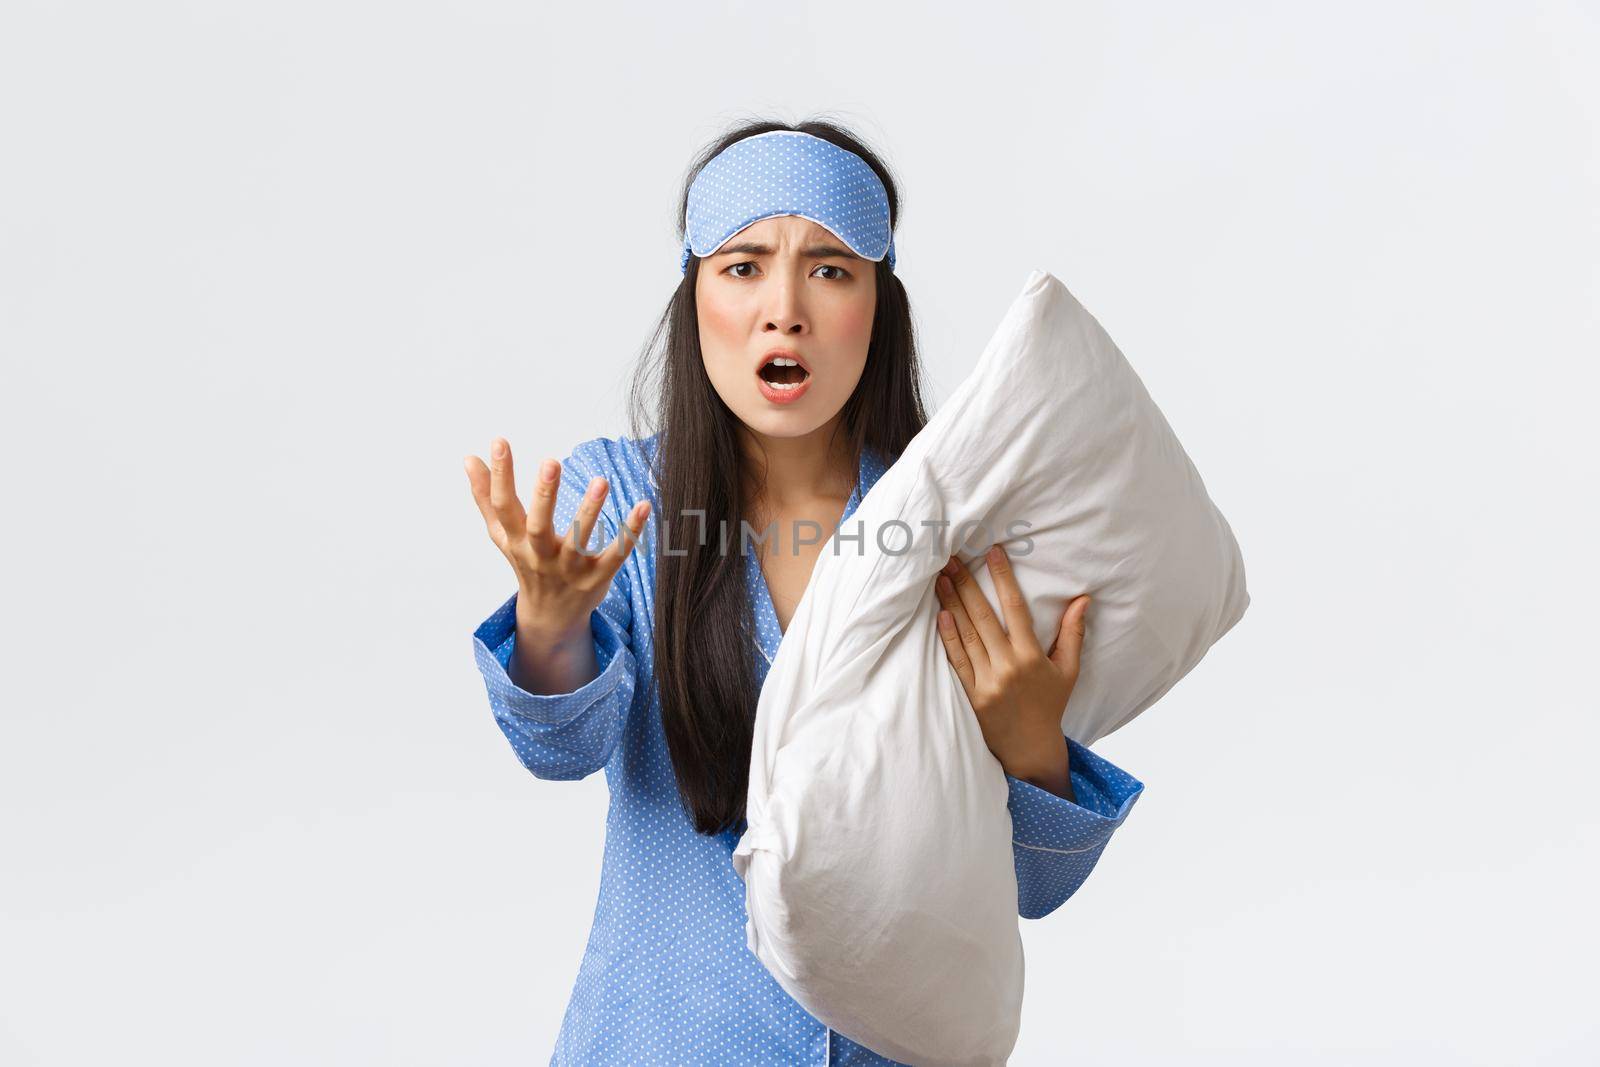 Angry bothered asian girl with insomnia, wearing sleeping mask and pajama, looking pissed-off as holding pillow and shaking hand furious, complaining on noise at night, white background.